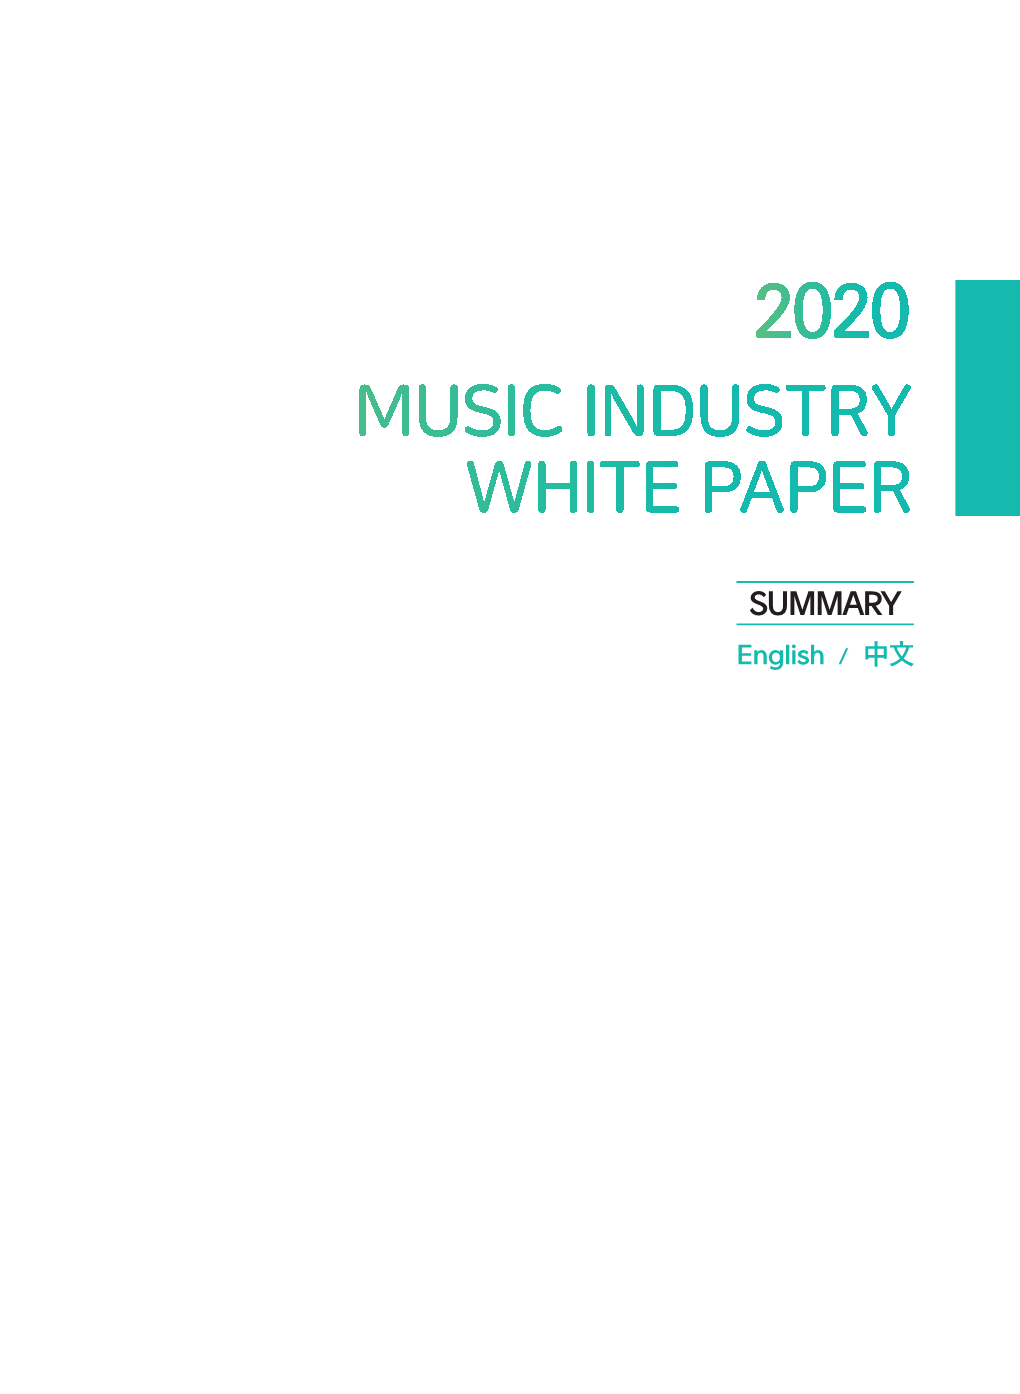 Music Industry White Paper